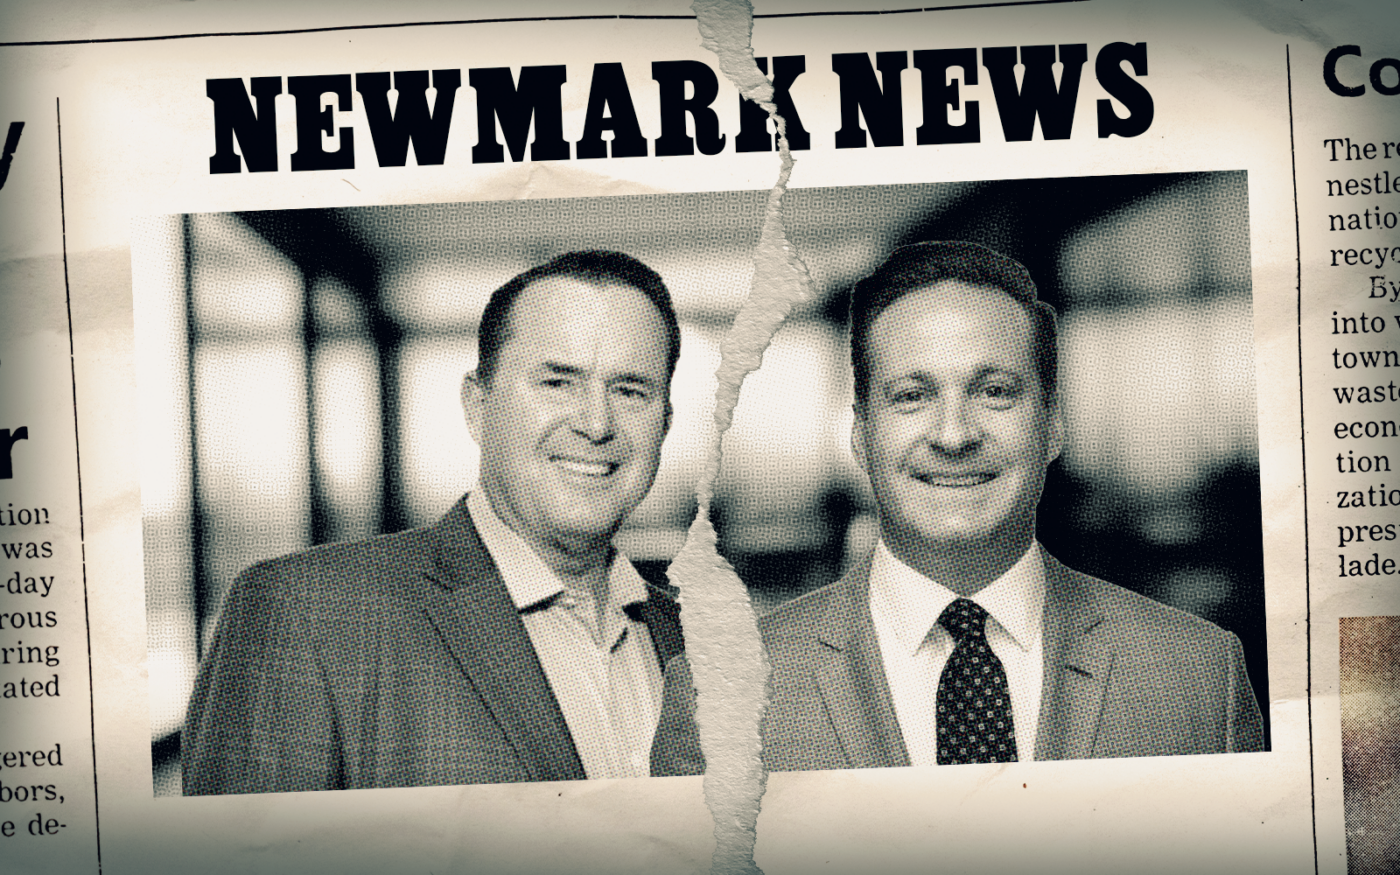 Greg May, Western Region Leader at Newmark, Leaves Firm